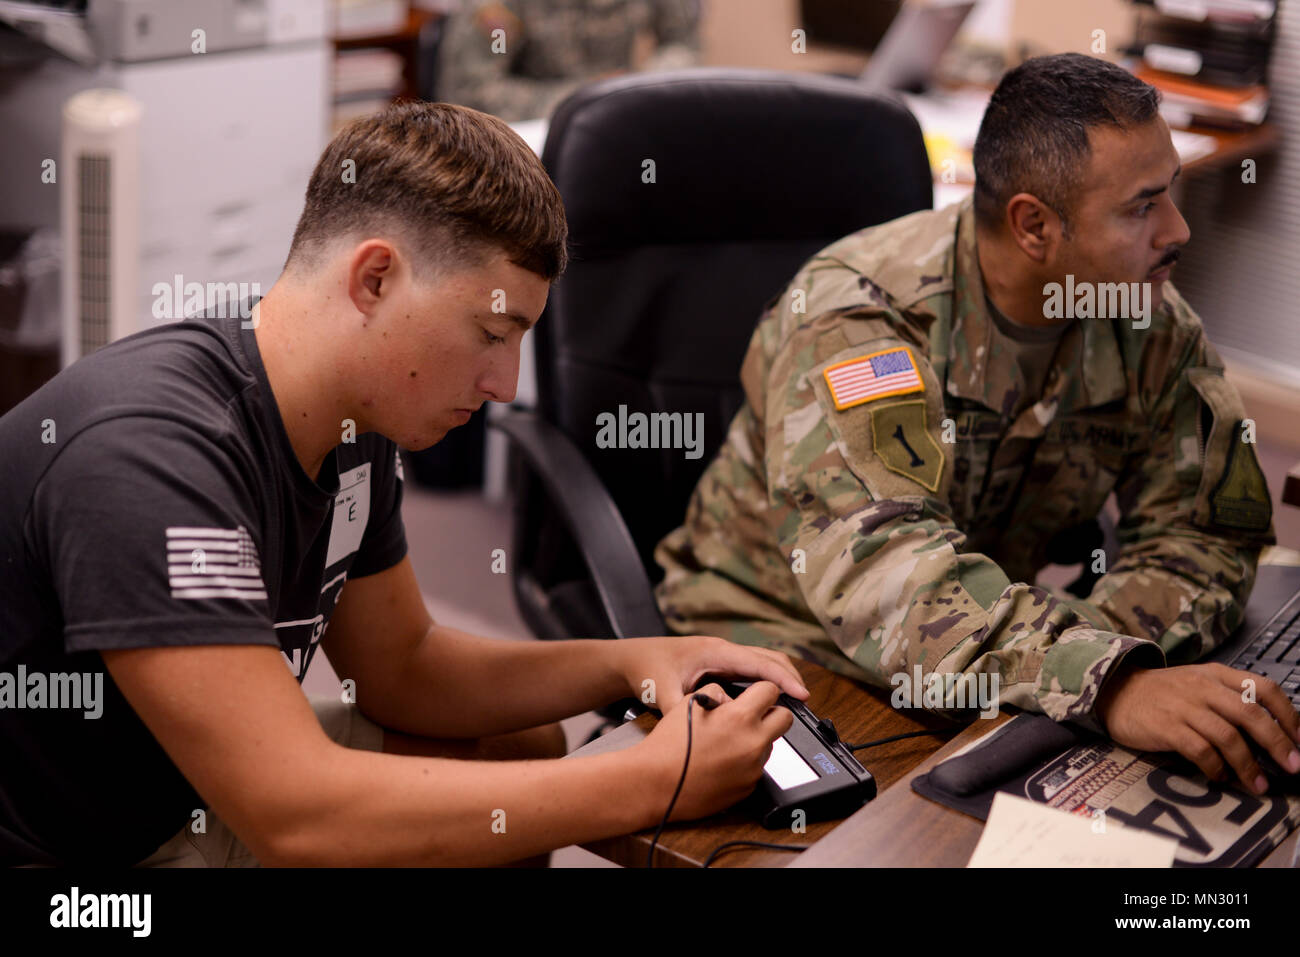 Raleigh, North Carolina - Nathan Jones, works with Sgt. 1st Class Carlos Rojas, a guidance counselor for the NCNG’s Recruiting and Retention Battalion, to sign and complete his enlistment contract at the Military Entrance Processing Station in Raleigh, August 11, 2017. When in the 4th grade, Jones, who the son of Chief Warrant Officer 3 Bruce Jones, the NCNG Force Integration Readiness Officer, told the NC Adjutant General, who at the time was Maj. Gen. William E. Ingram Jr., that he would join the NCNG when he grew up, just like his dad. (U.S. Army Photo by Staff Sgt. Mary Junell) Stock Photo